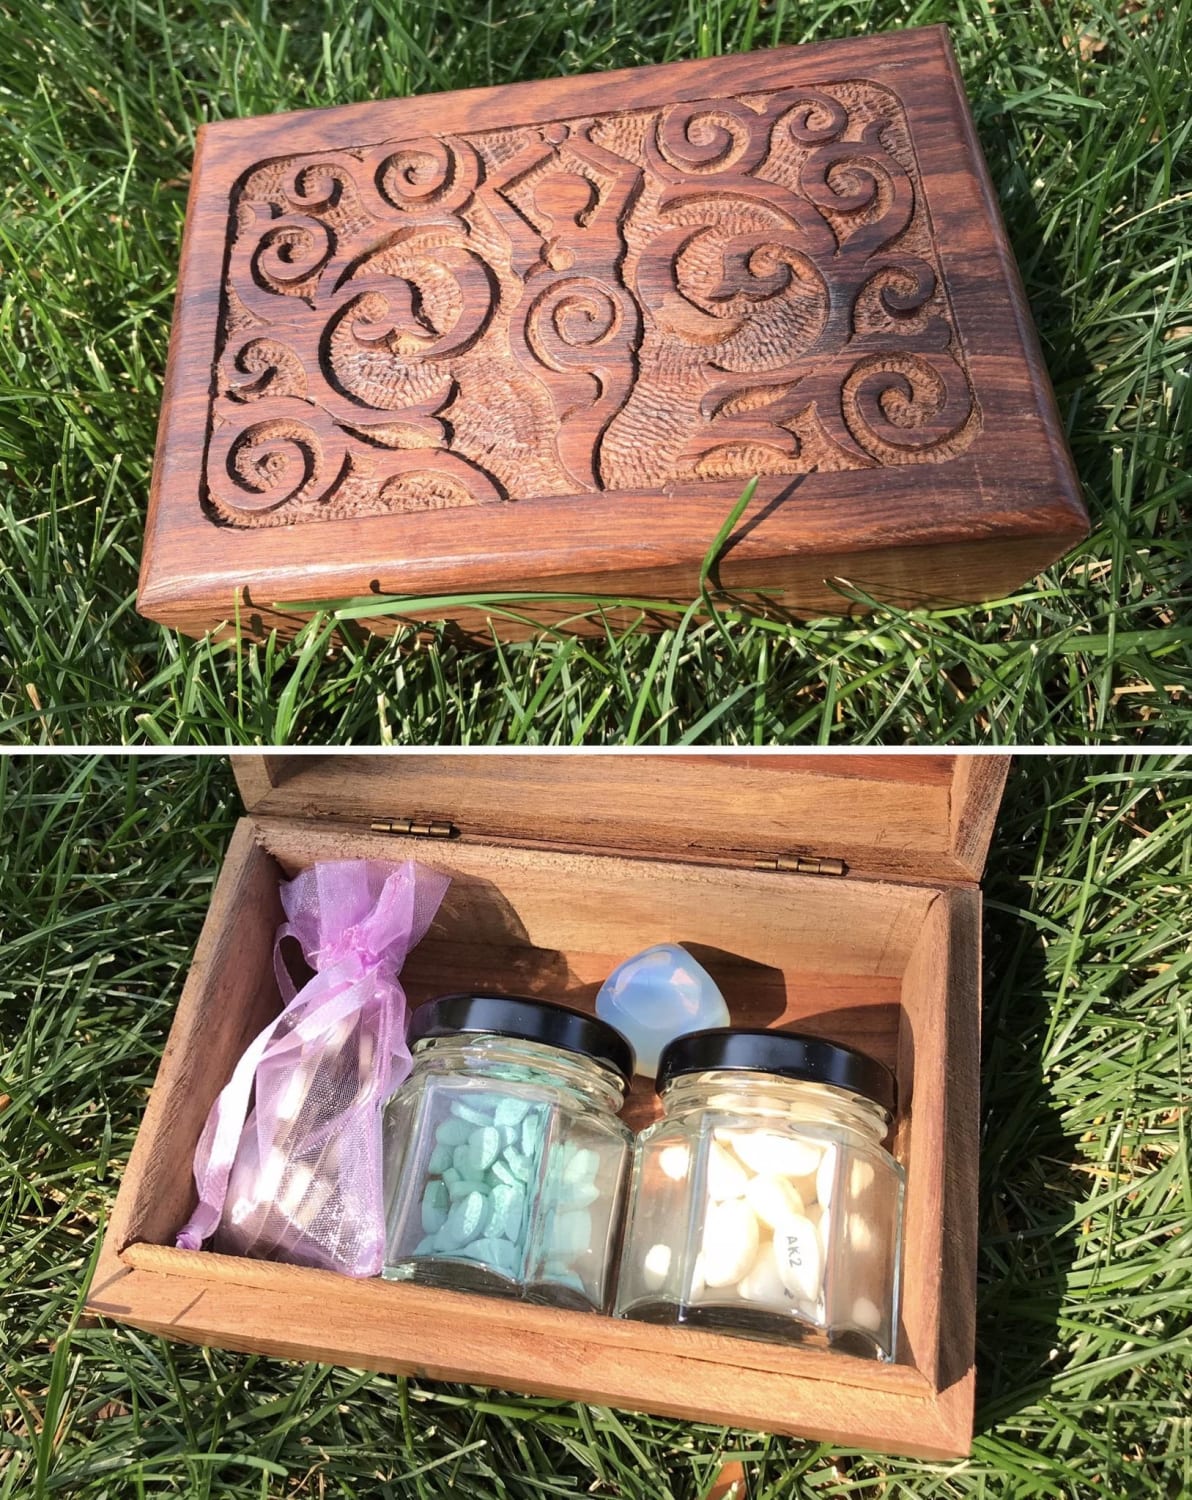 Goddess Box for my trans love’s shape-shifting potions (HRT) ✨❤️ Includes Opalite which is said to support transitions